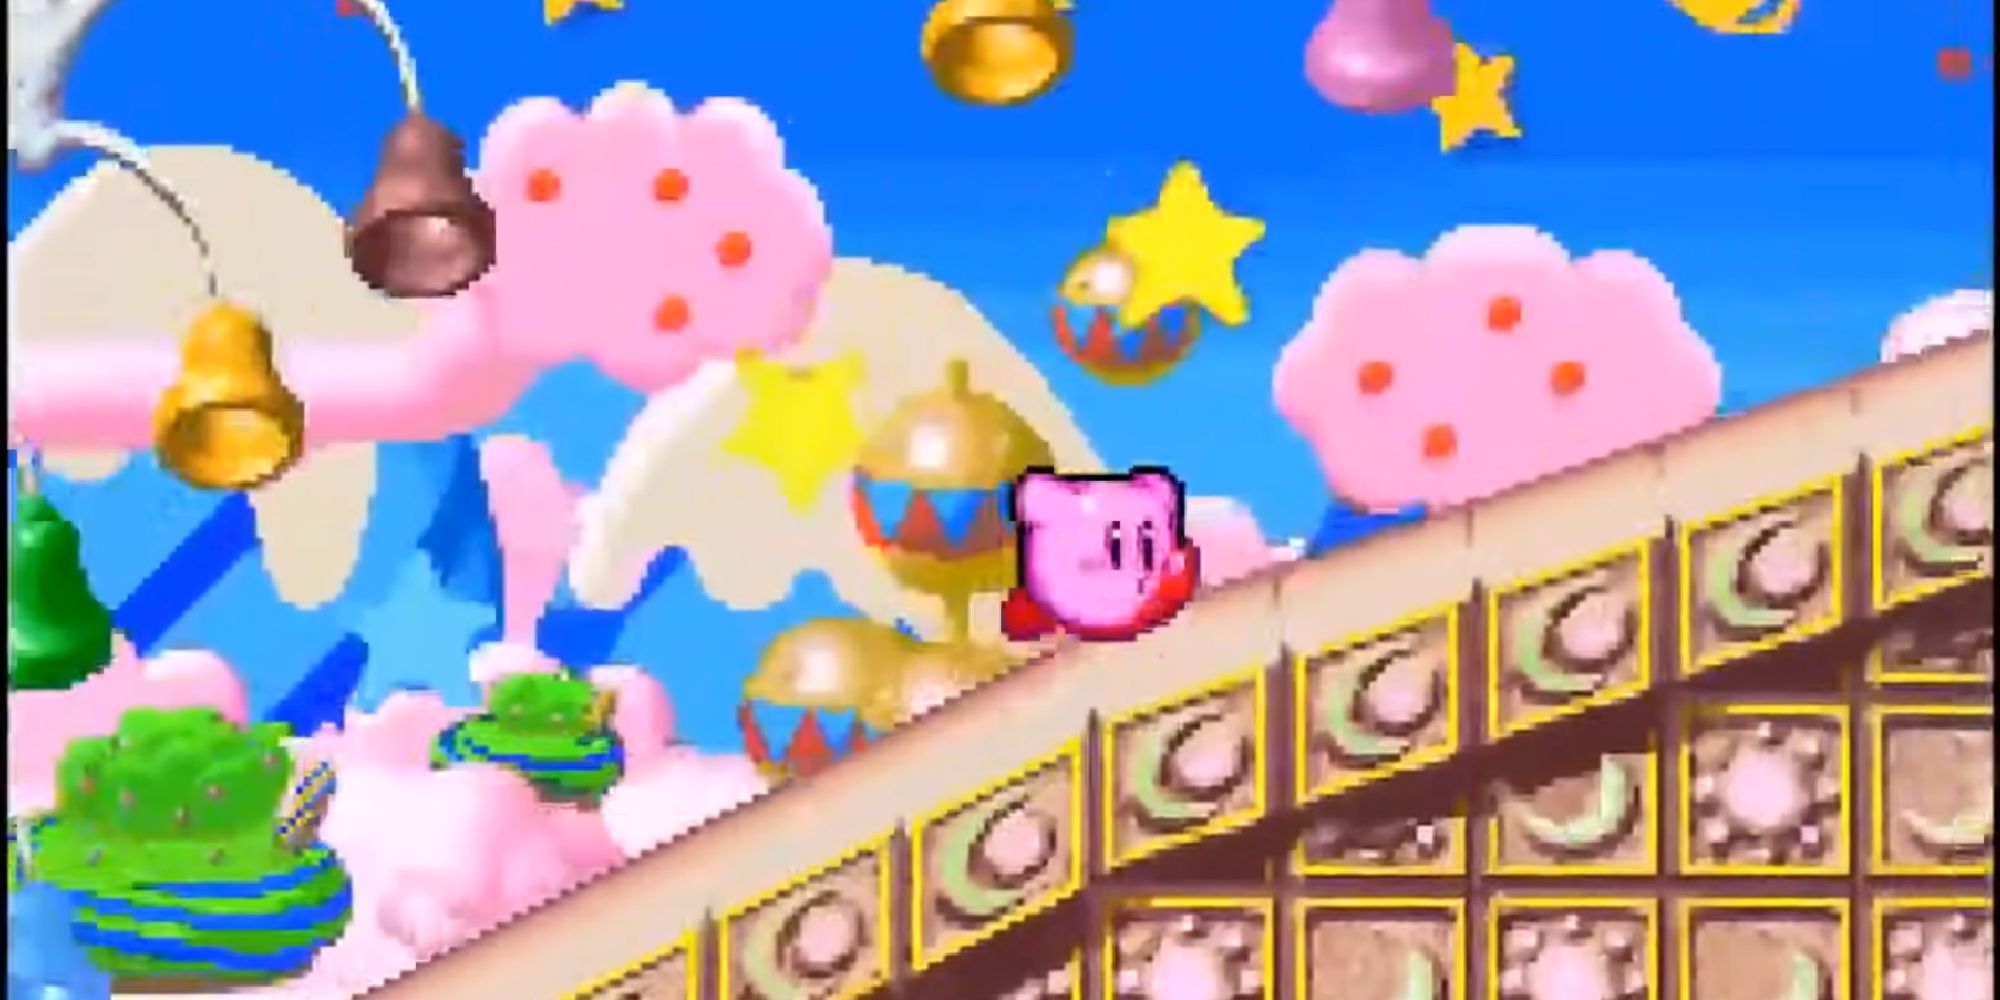 Kirby sprints through a pastel-colored course in the Gourmet Race mode in Kirby Super Star